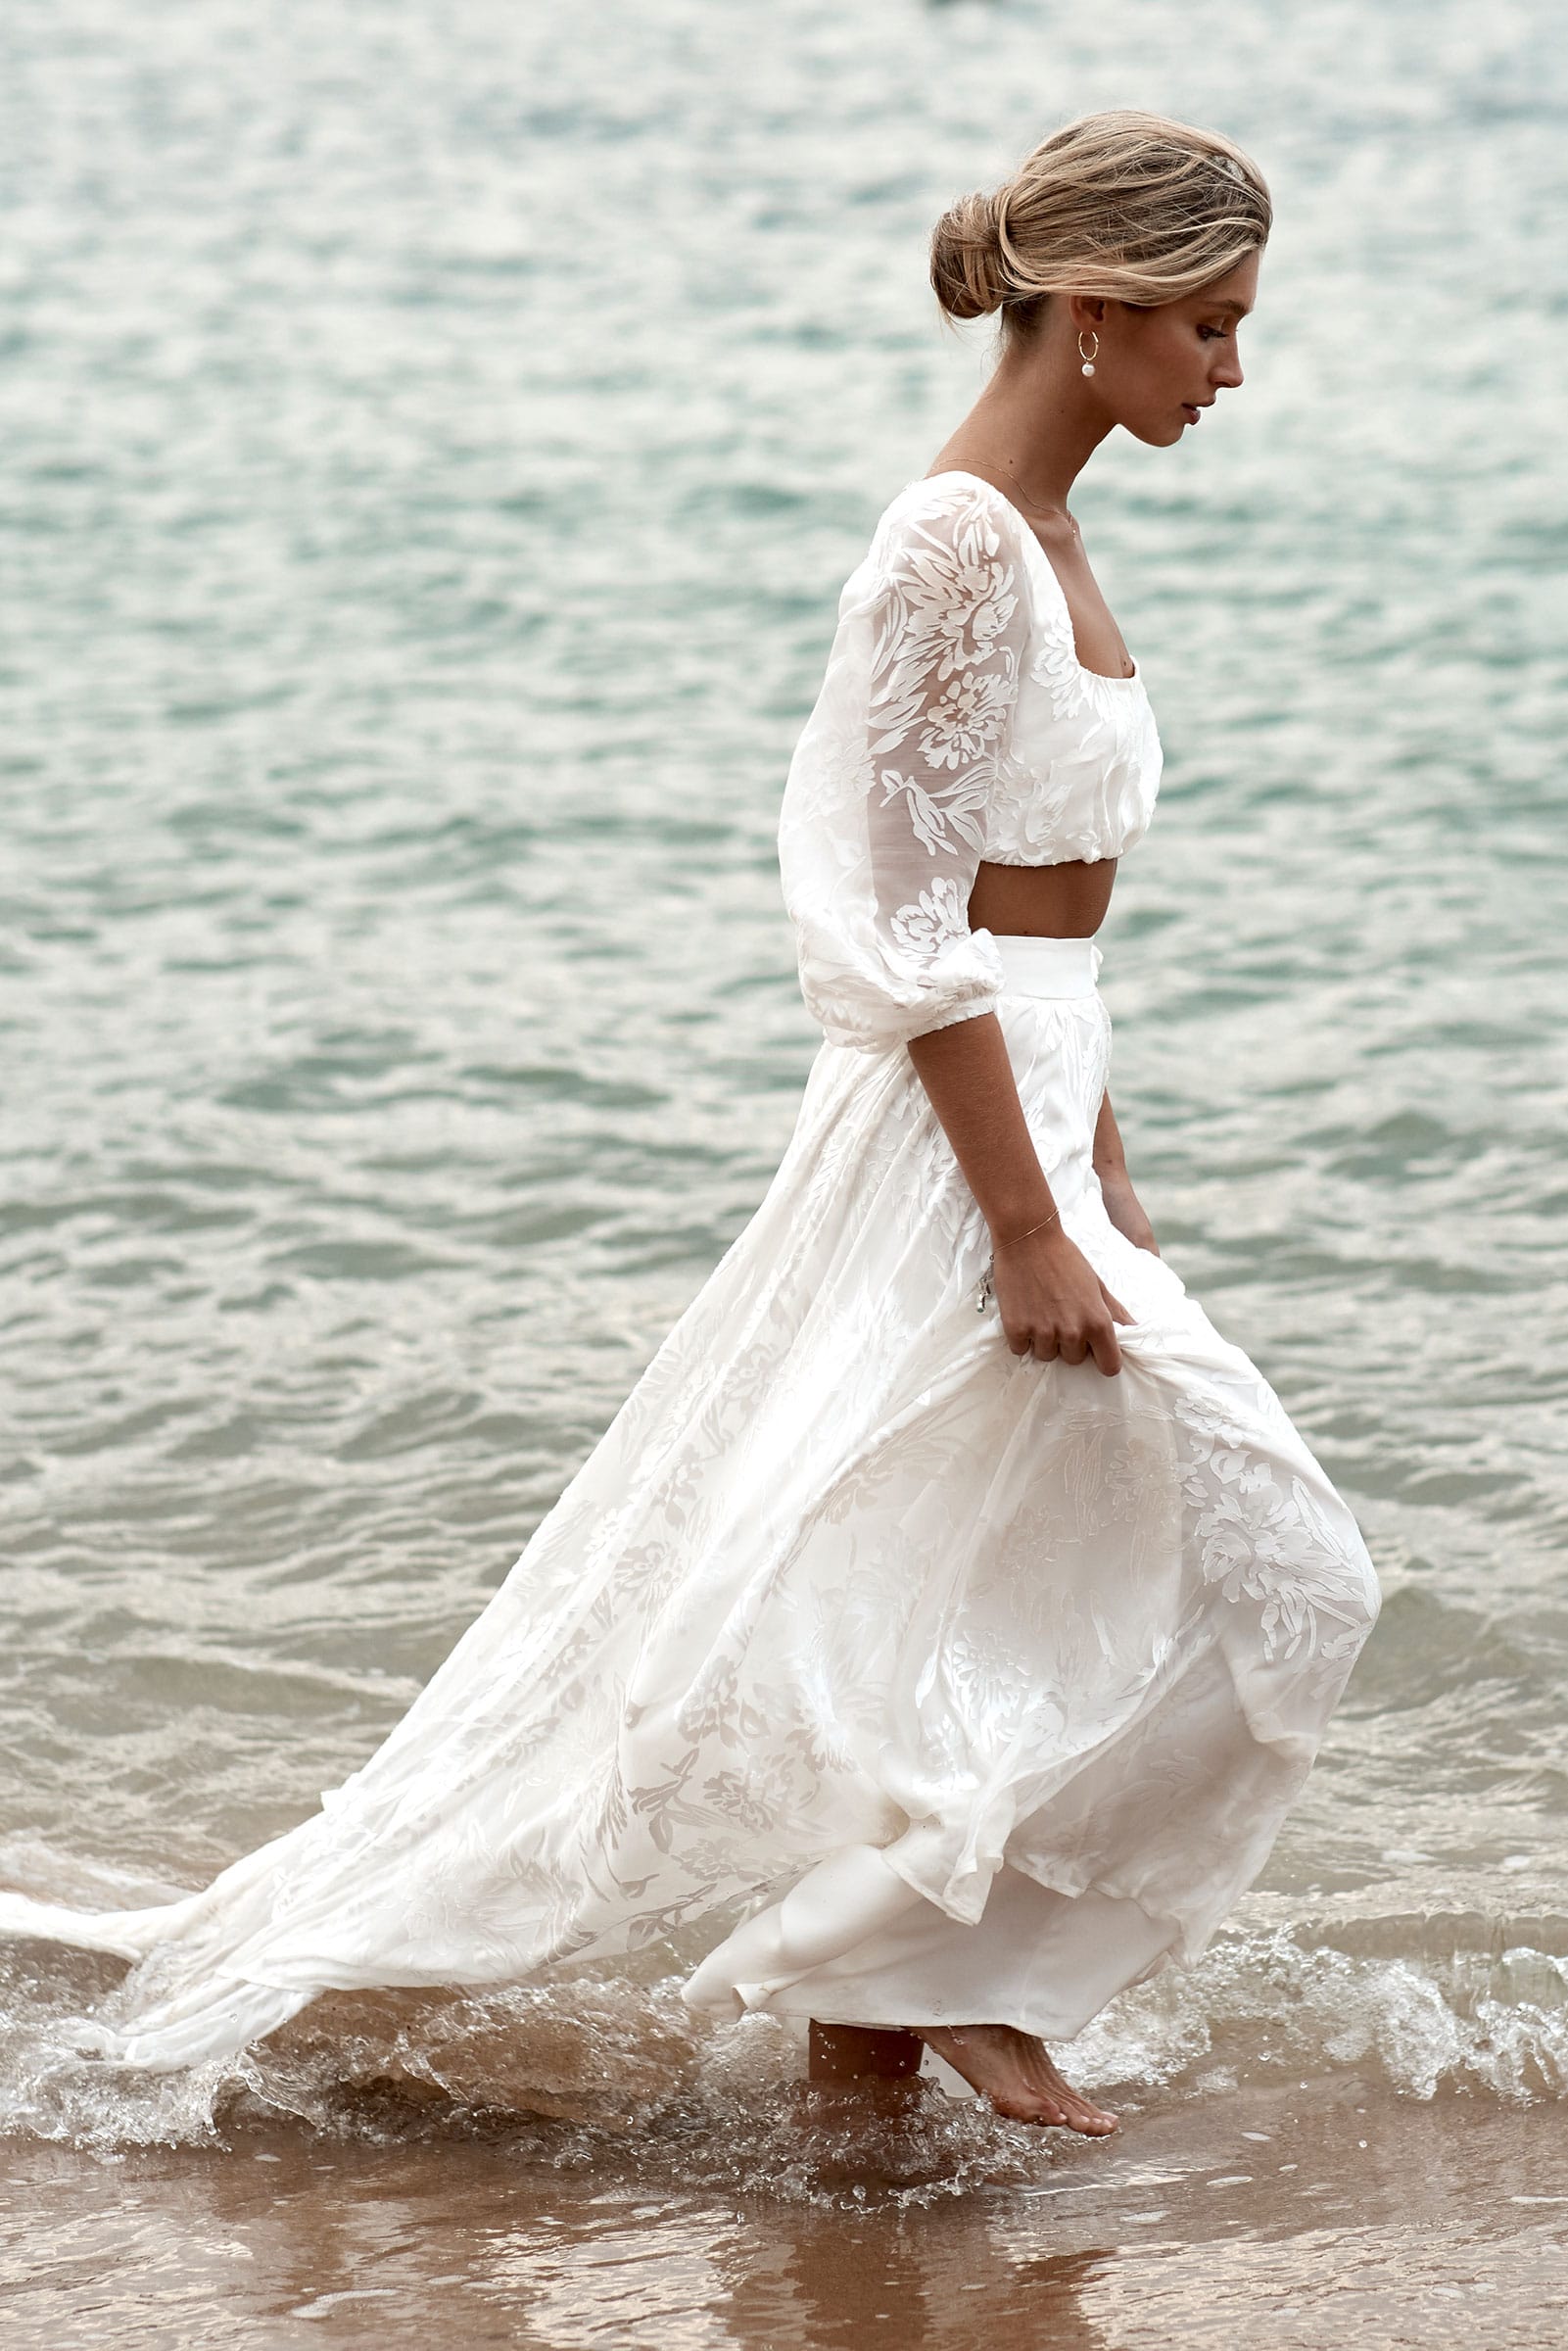 The Best Places to Buy or Sell a Preloved Wedding Dress